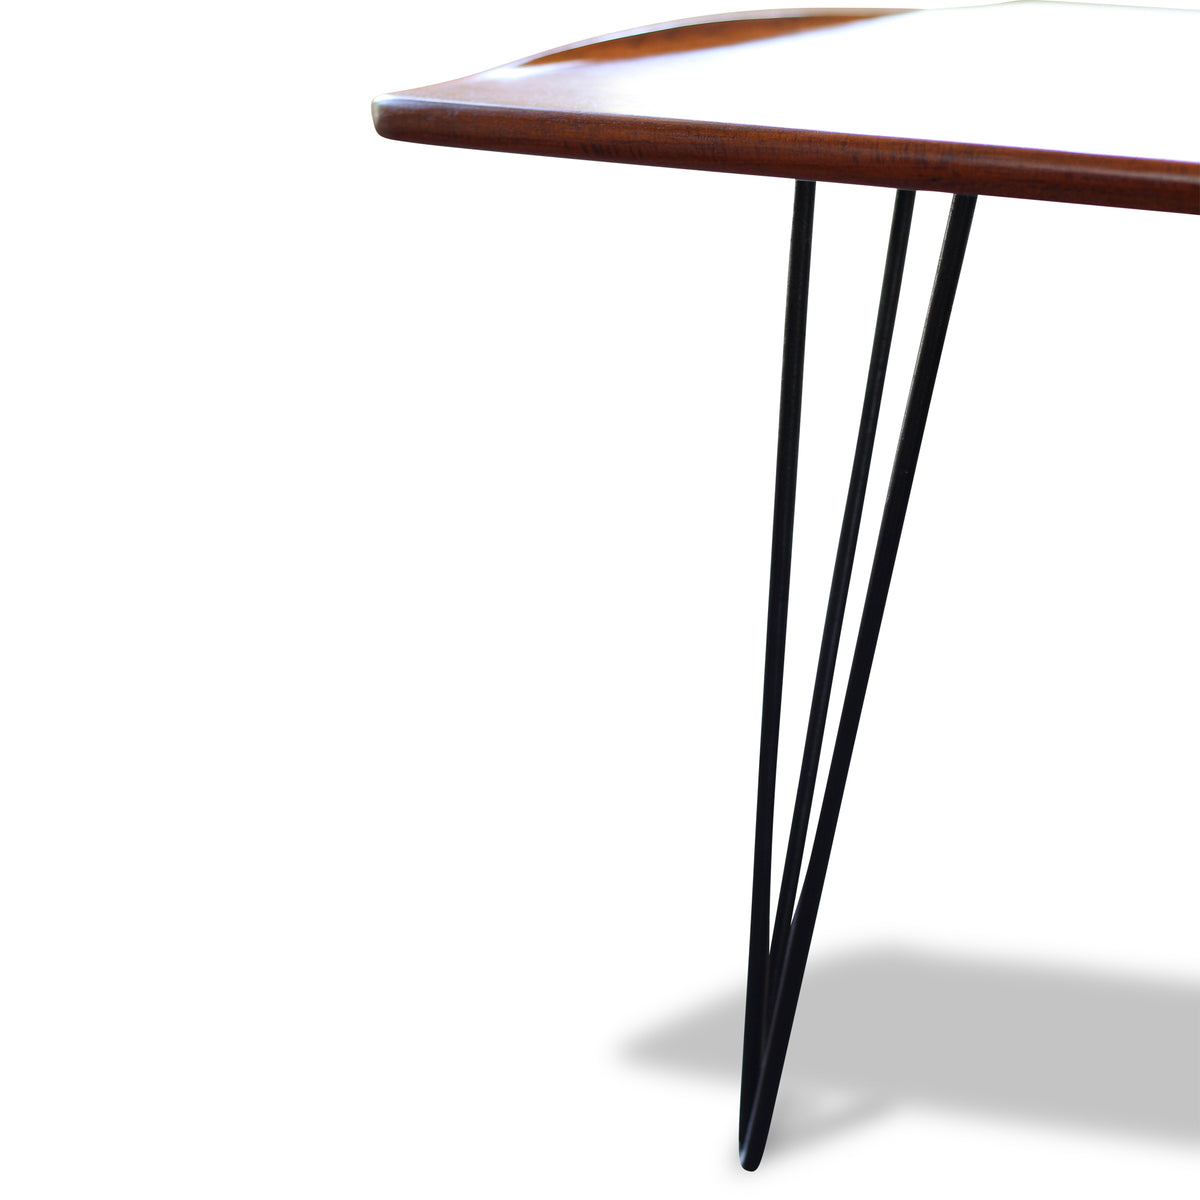 Teak Coffee Table with Hairpin Legs